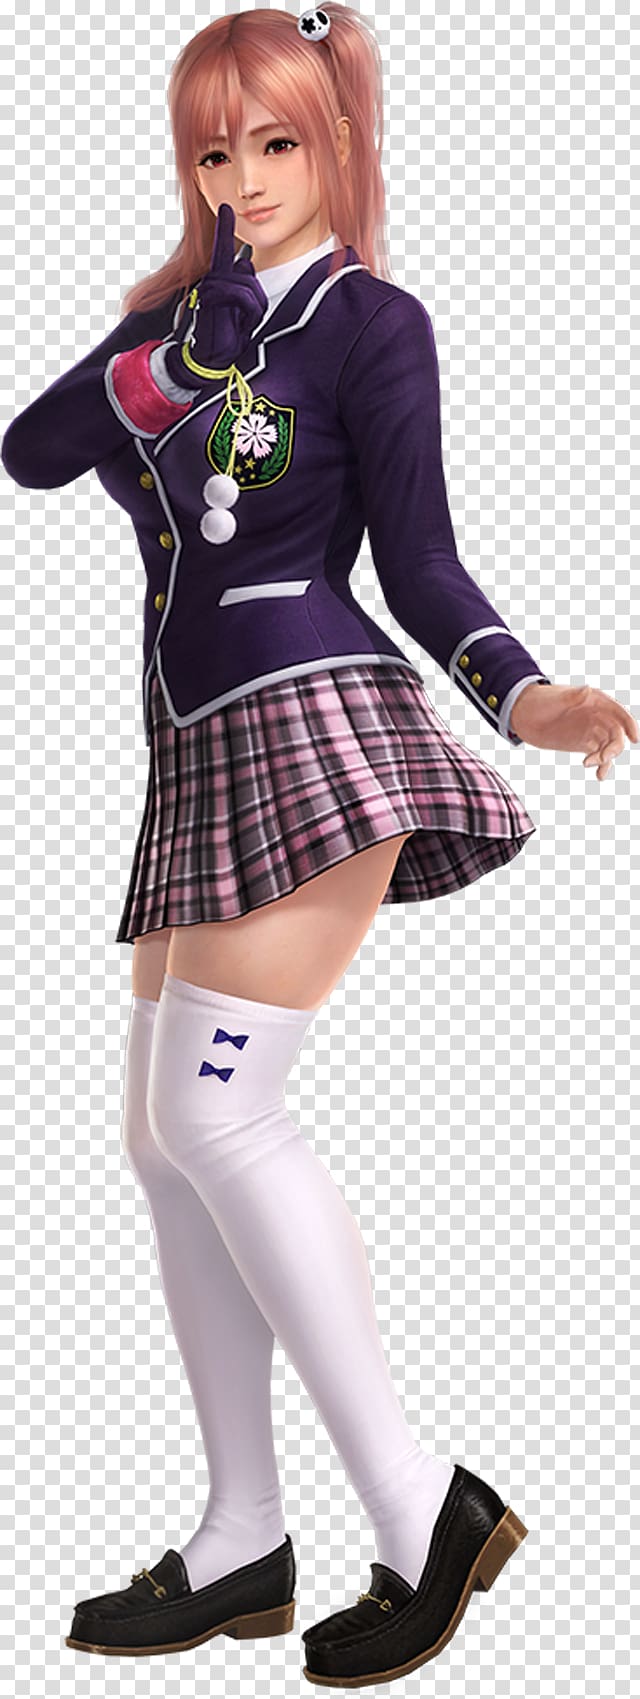 Dead or Alive 5 Last Round Dead or Alive 5 Ultimate Warriors All-Stars Ayane, Cheerleader transparent background PNG clipart